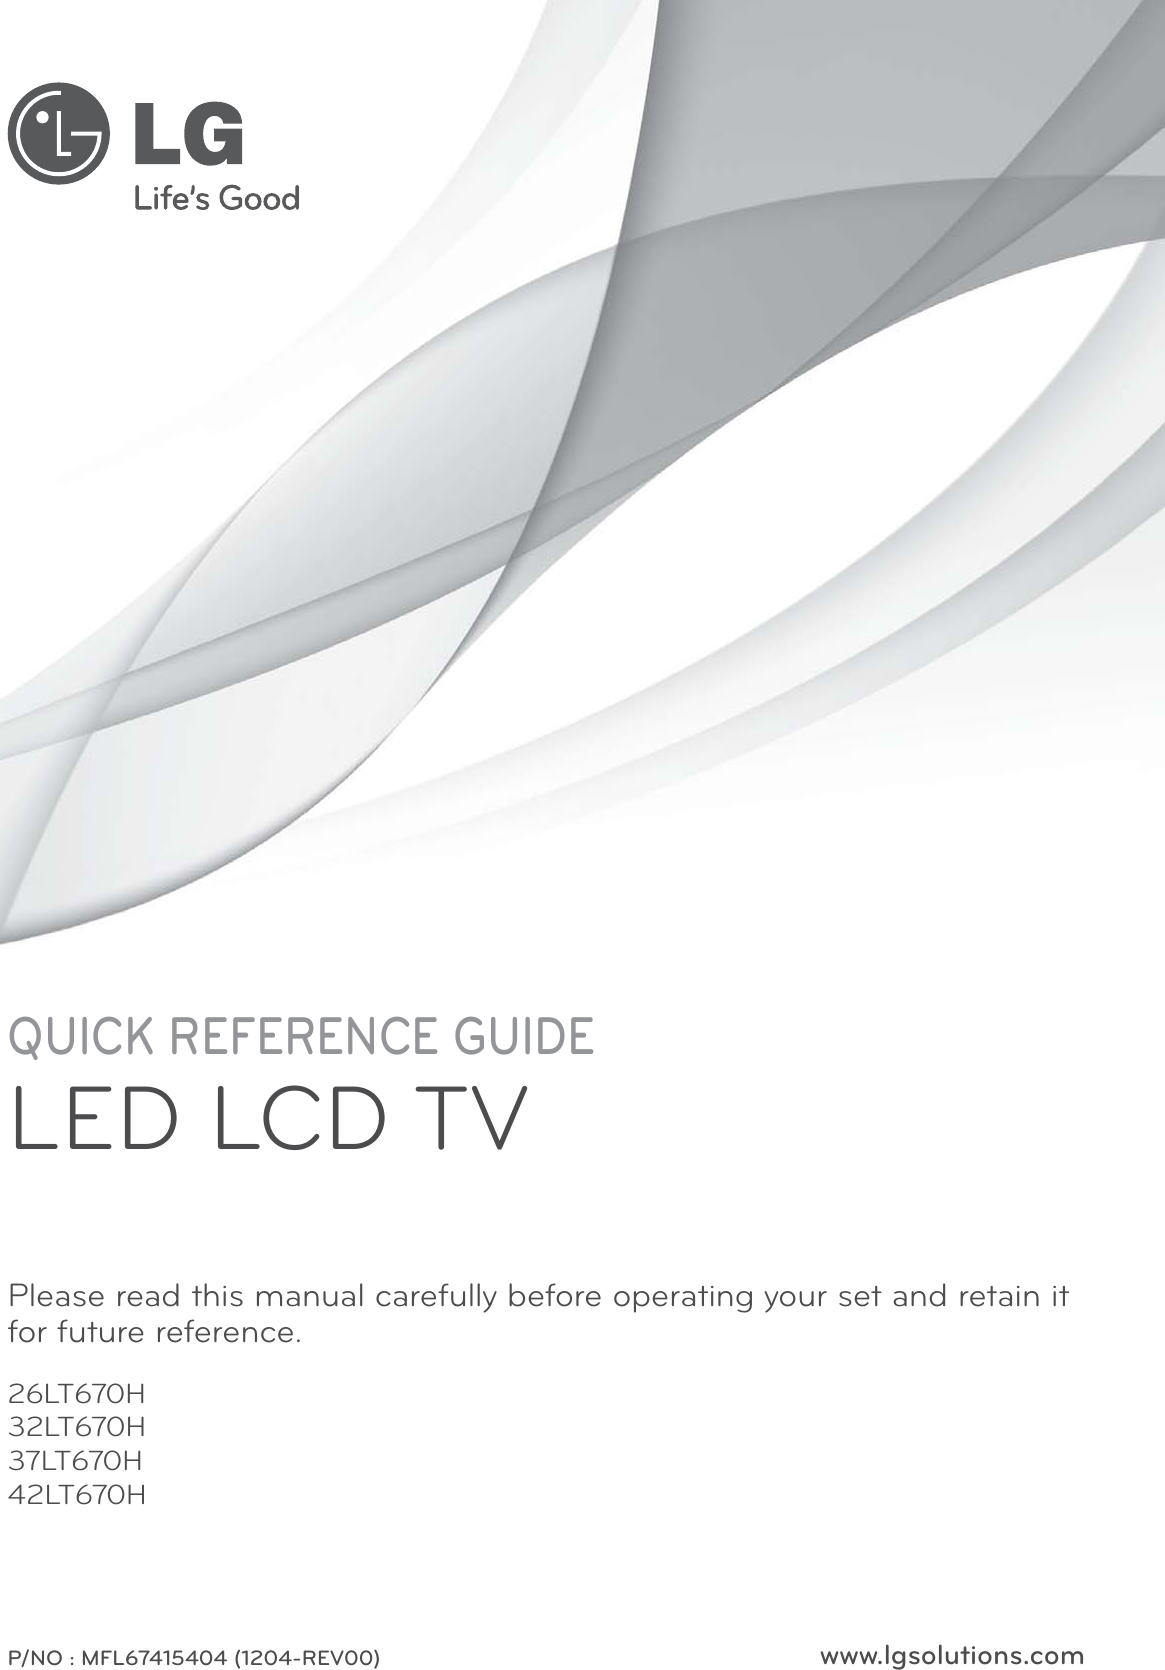 www.lgsolutions.comQUICK REFERENCE GUIDELED LCD TVPlease read this manual carefully before operating your set and retain it for future reference.26LT670H32LT670H37LT670H42LT670HP/NO : MFL67415404 (1204-REV00)